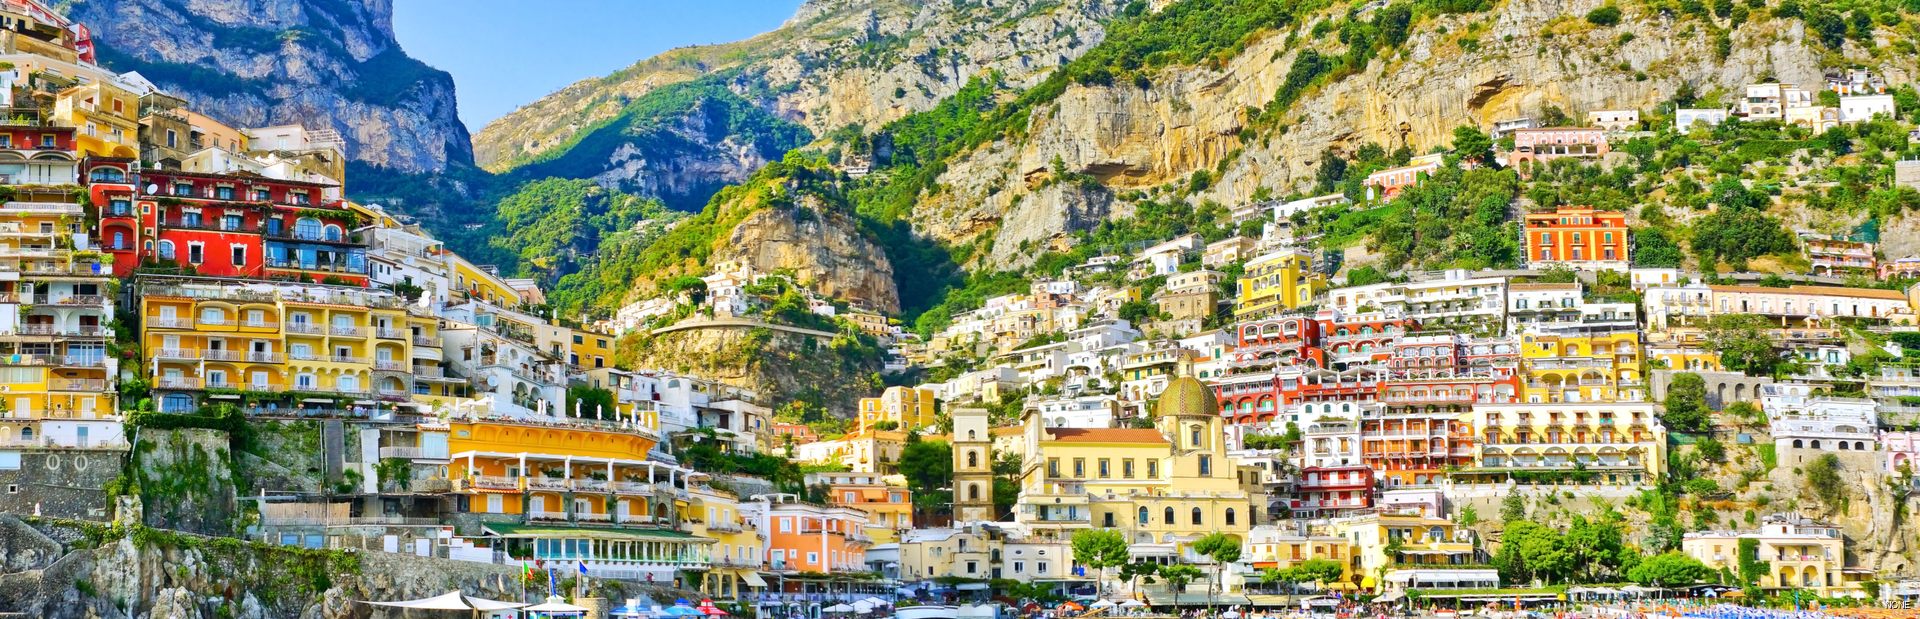 Things to see & do inPositano